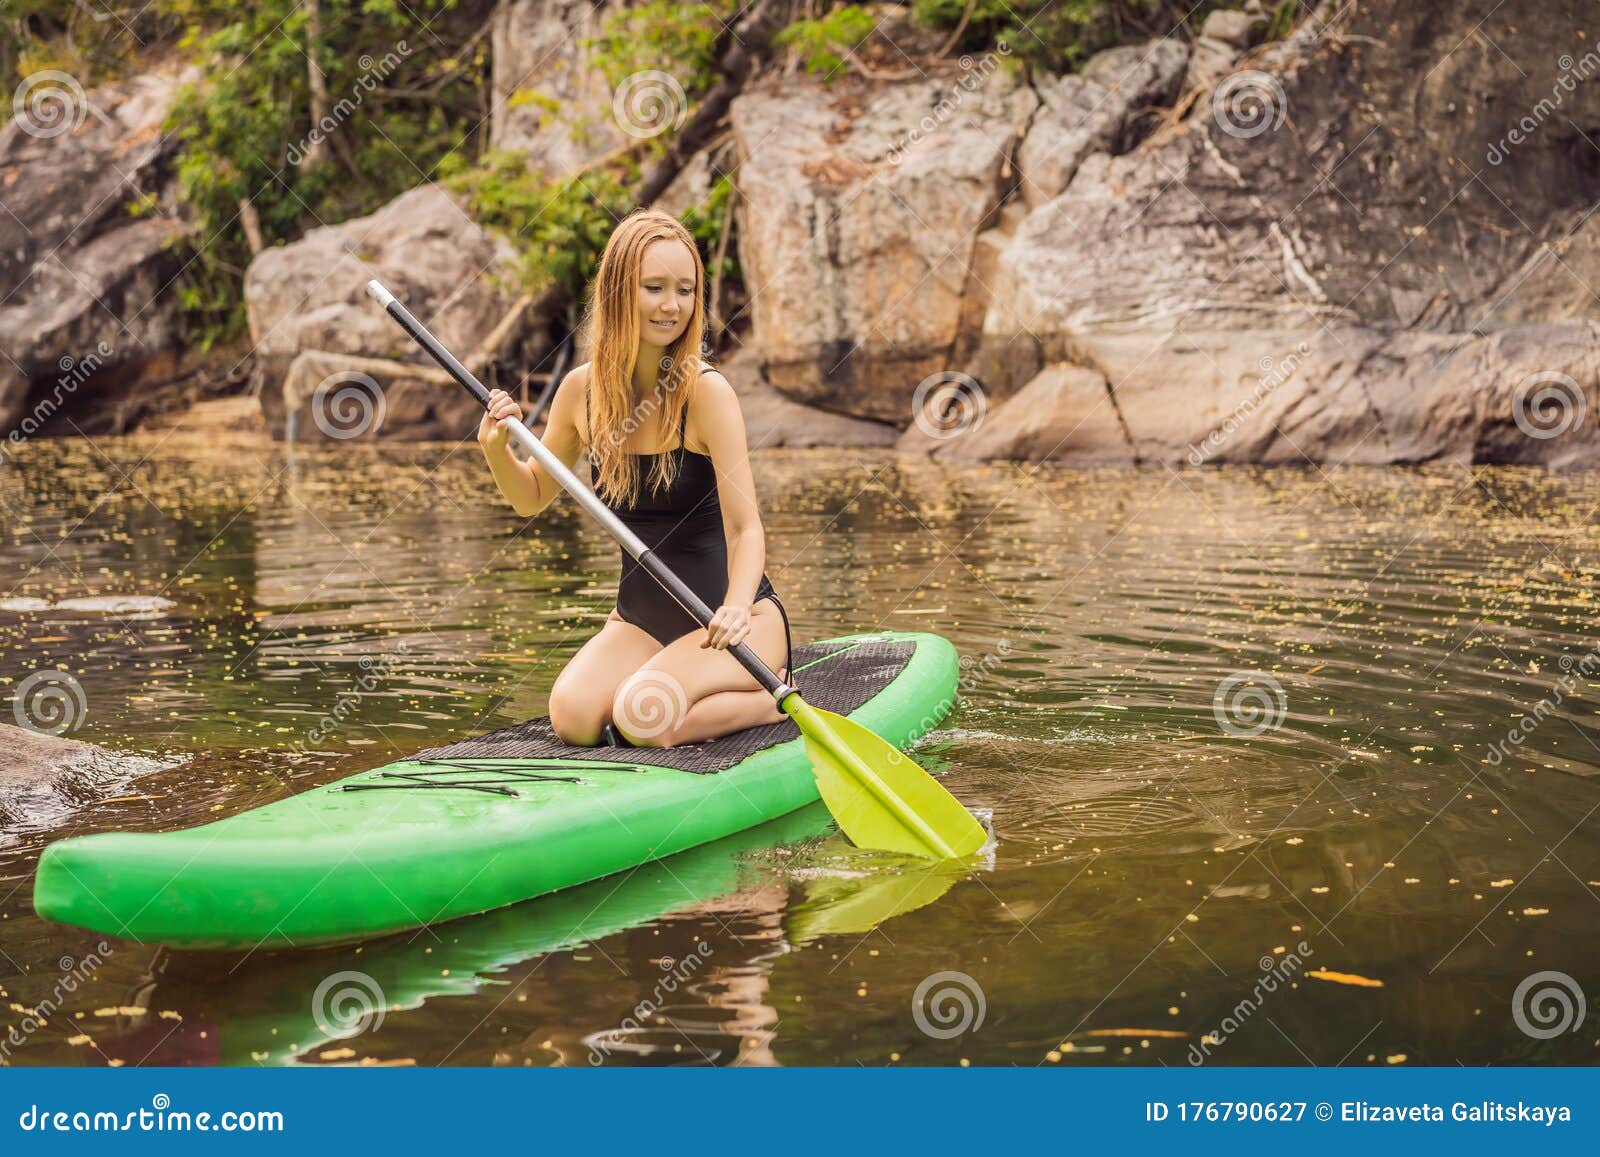 SUP Stand Up Paddle Board Woman Paddle Boarding on Lake Standing Happy ...